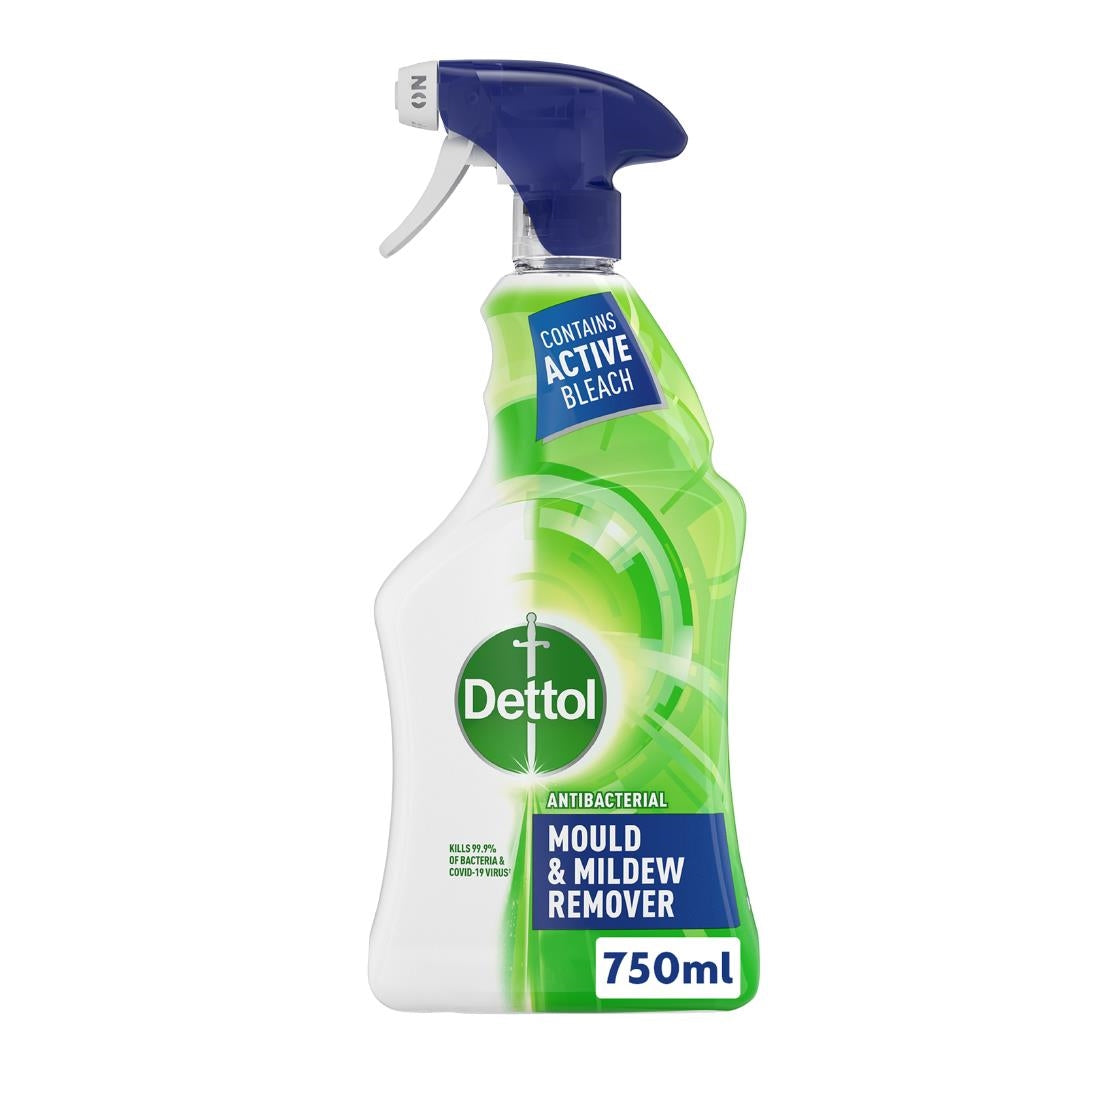 CU995 Dettol Pro Antibacterial Mould and Mildew Remover 750ml